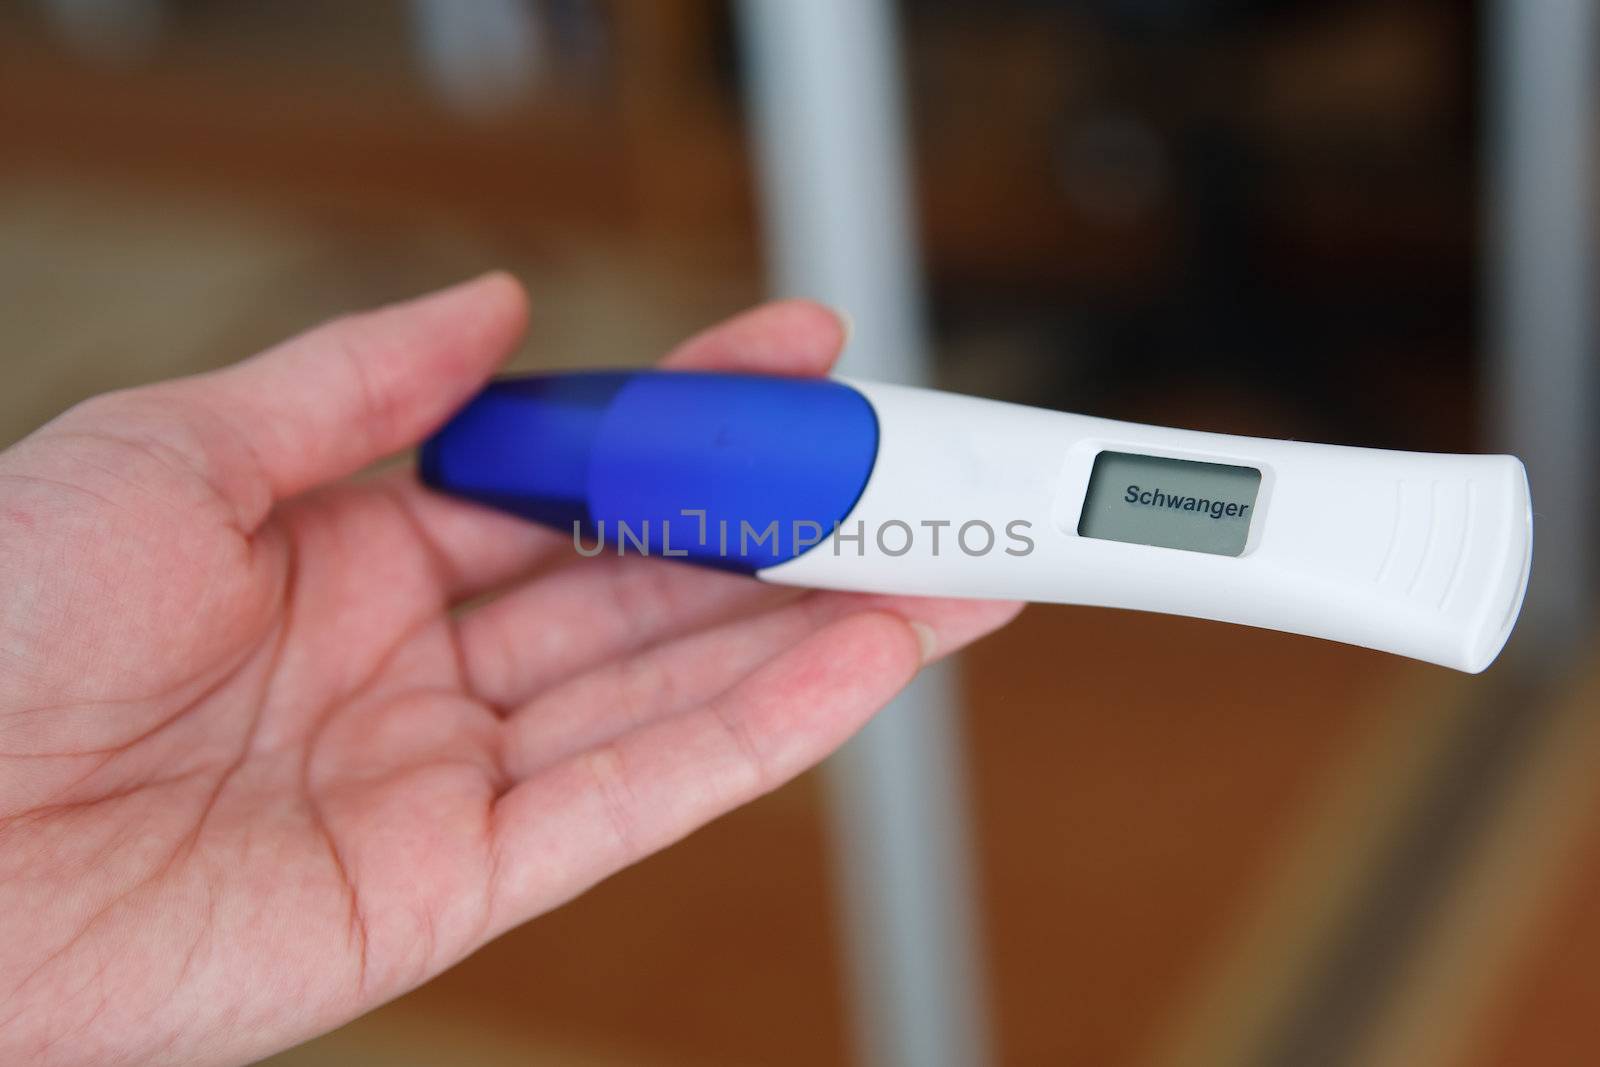 Woman taking a pregnancy test showing pregnant result